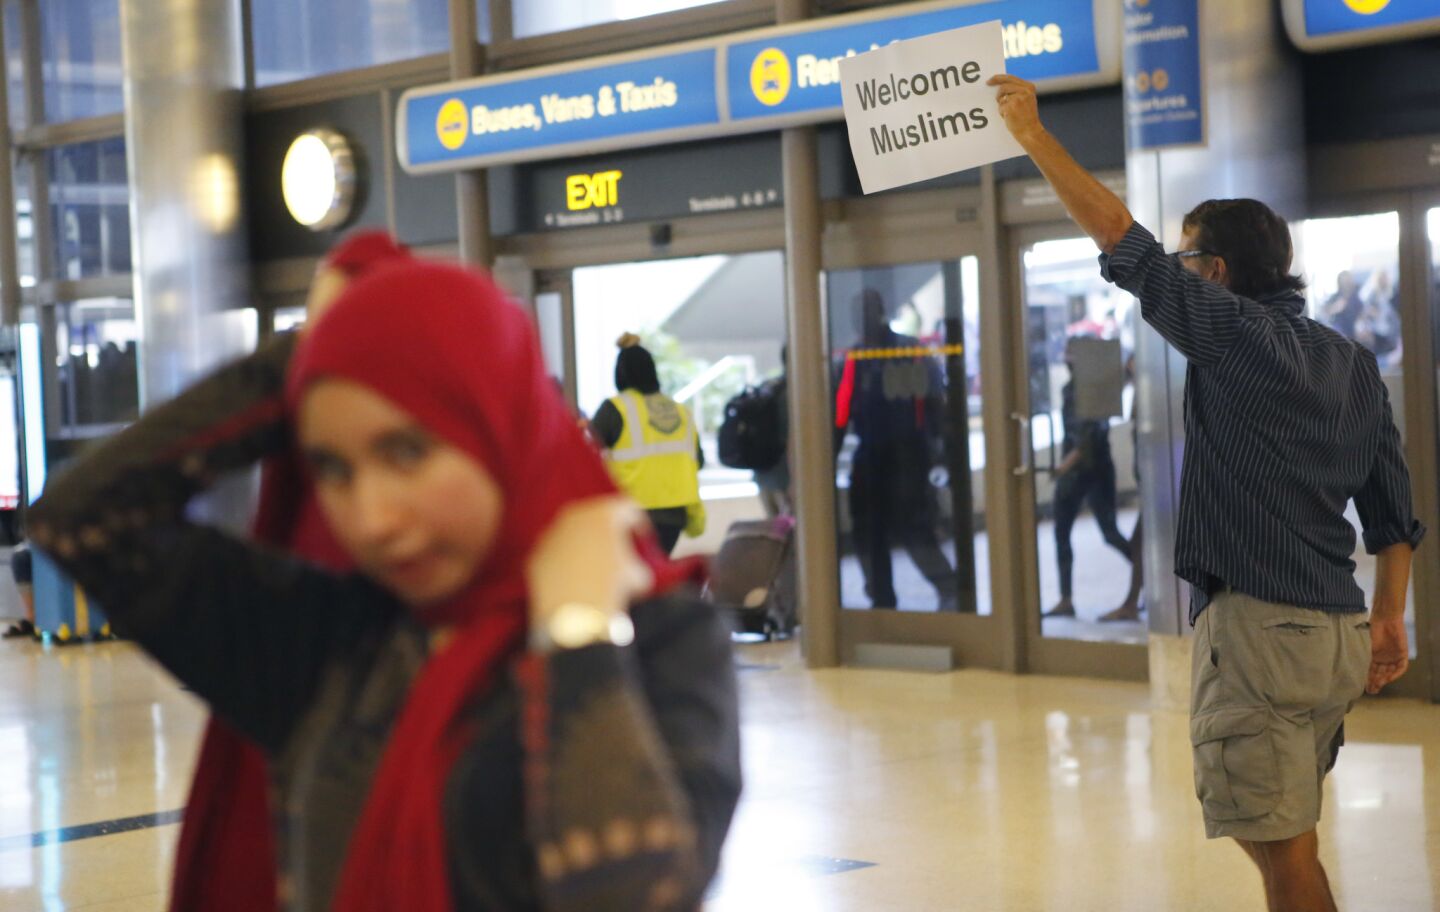 John Wilder holds a sign welcoming Muslims to the United States at Tom Bradley International Terminal.